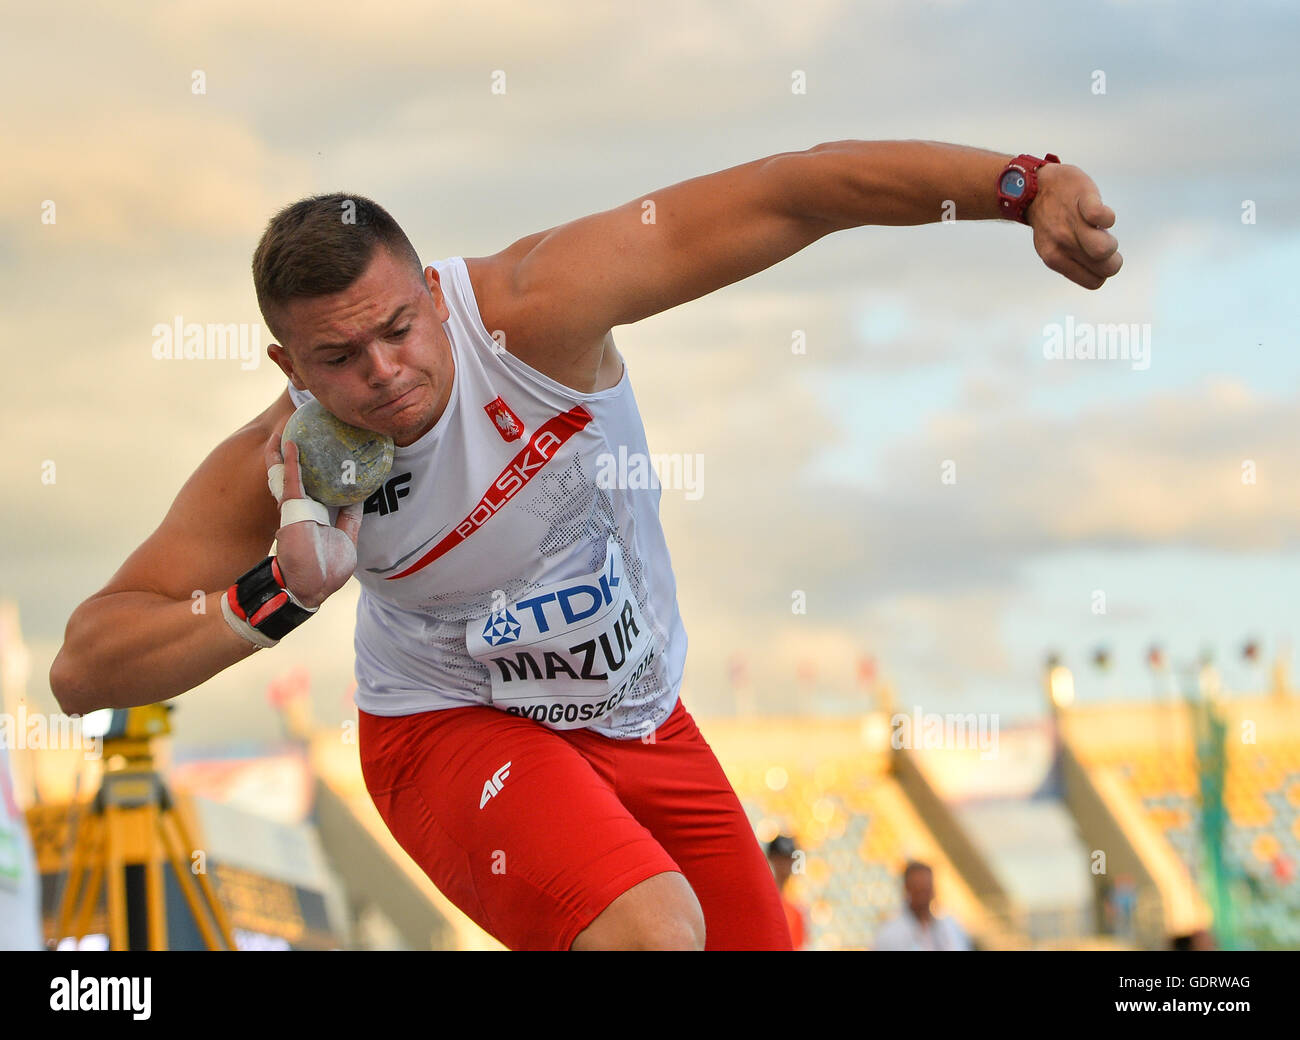 Bydgoszcz, Poland. 19th July, 2016. Szymon Mazur of Poland in the final of the mens shot put during the afternoon session on day 1 of the IAAF World Junior Championships at Zawisza Stadium on July 19, 2016 in Bydgoszcz, Poland. Credit:  Roger Sedres/Alamy Live News Stock Photo